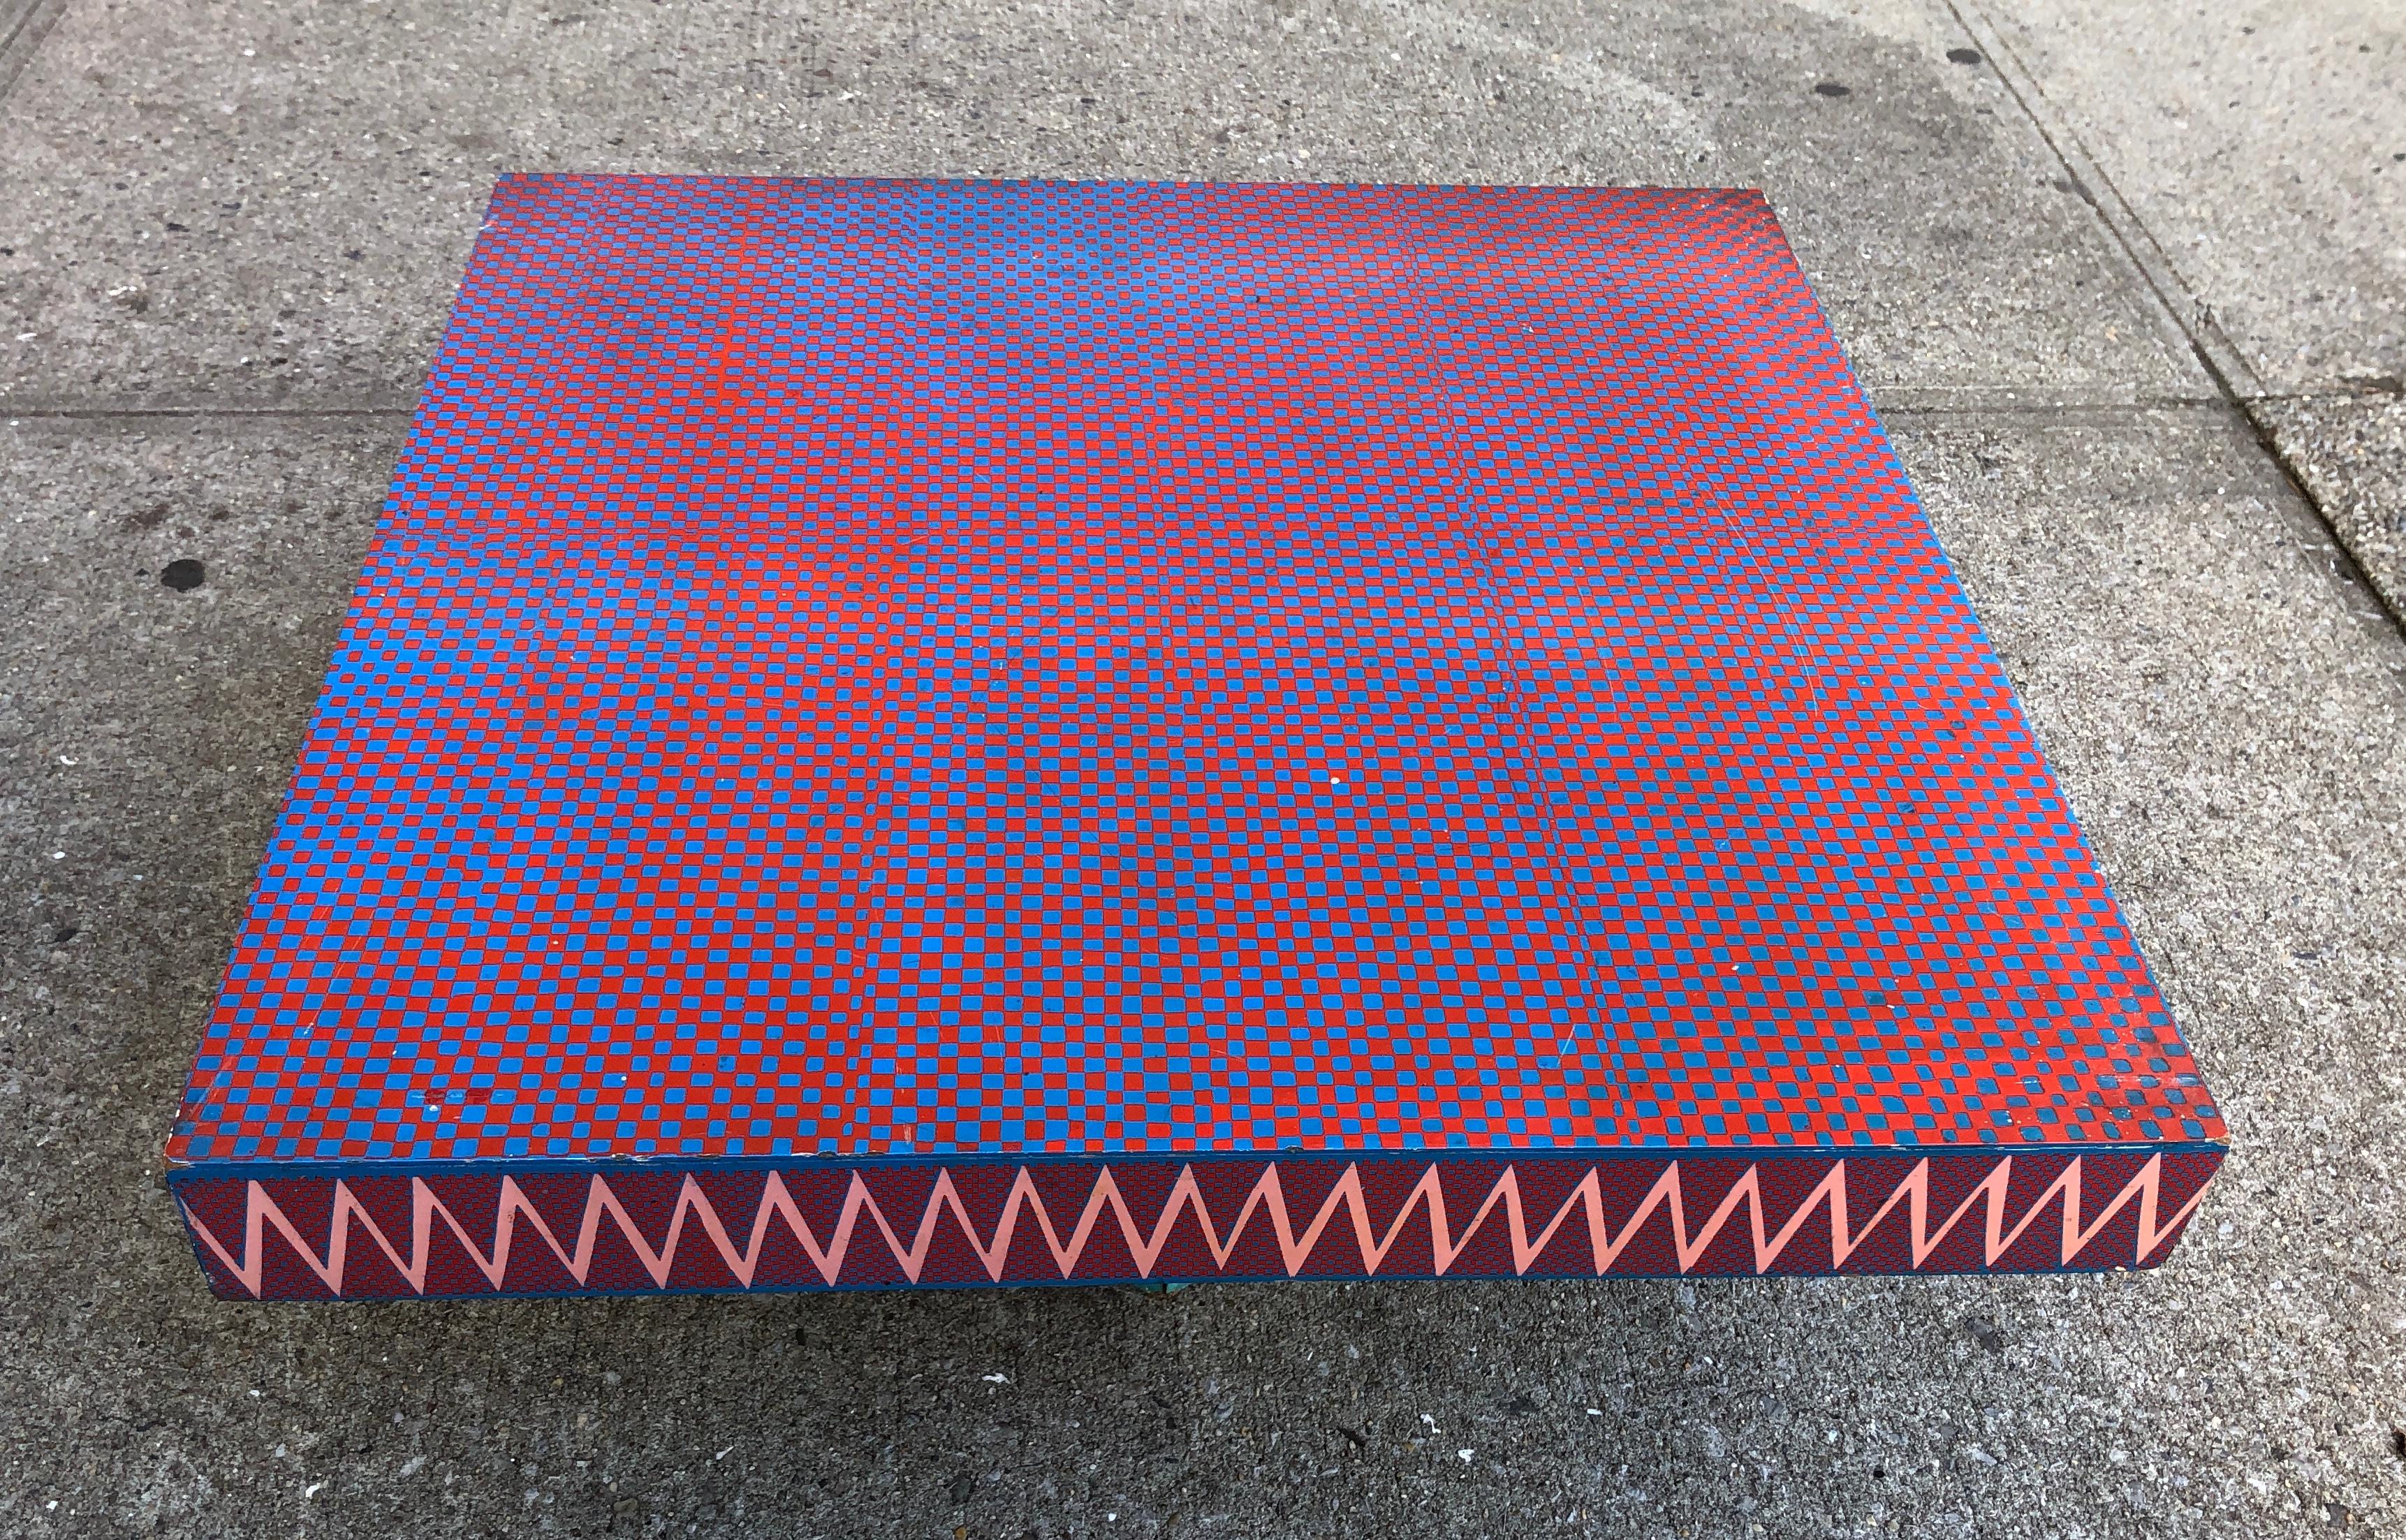 Lacquer-painted op-art low table by the celebrated Vogue photographer circa 1960s. His rarely seen furniture collection was briefly retailed at Bloomingdales. Acquired from the artist's estate.